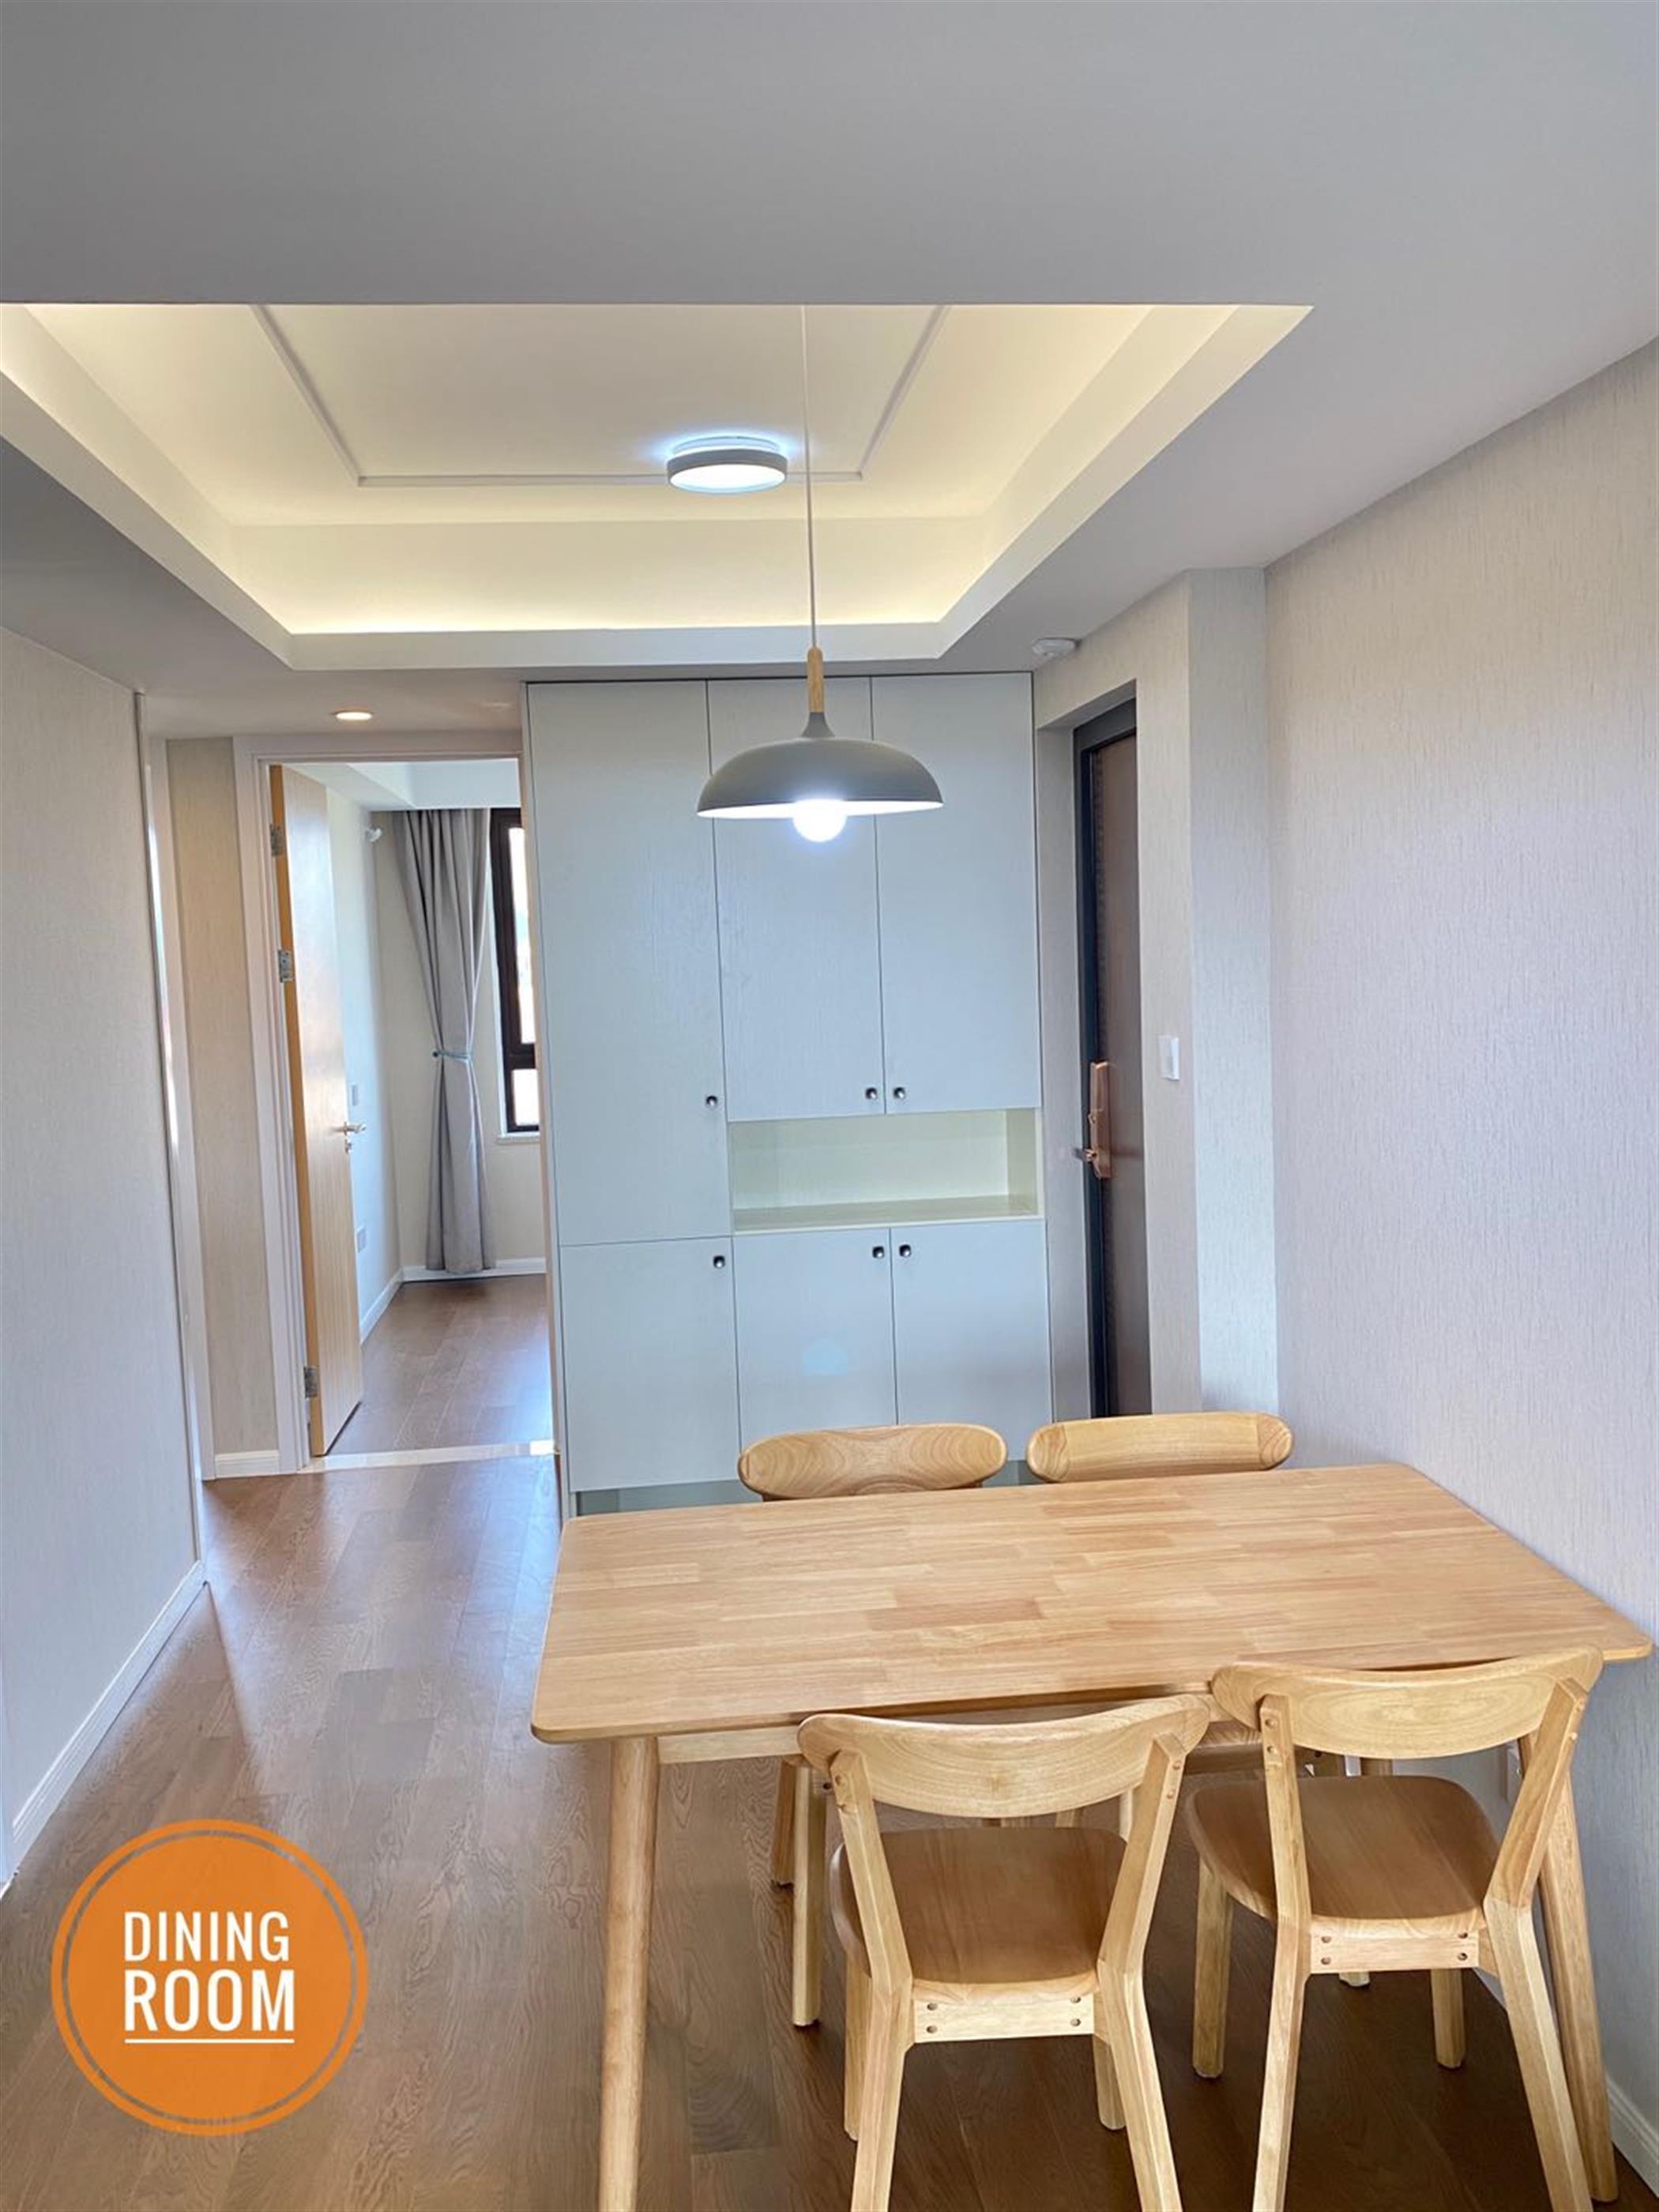 Dining Area Brand New Sunny Apartment nr LN 10 for Rent in Hongkou Shanghai